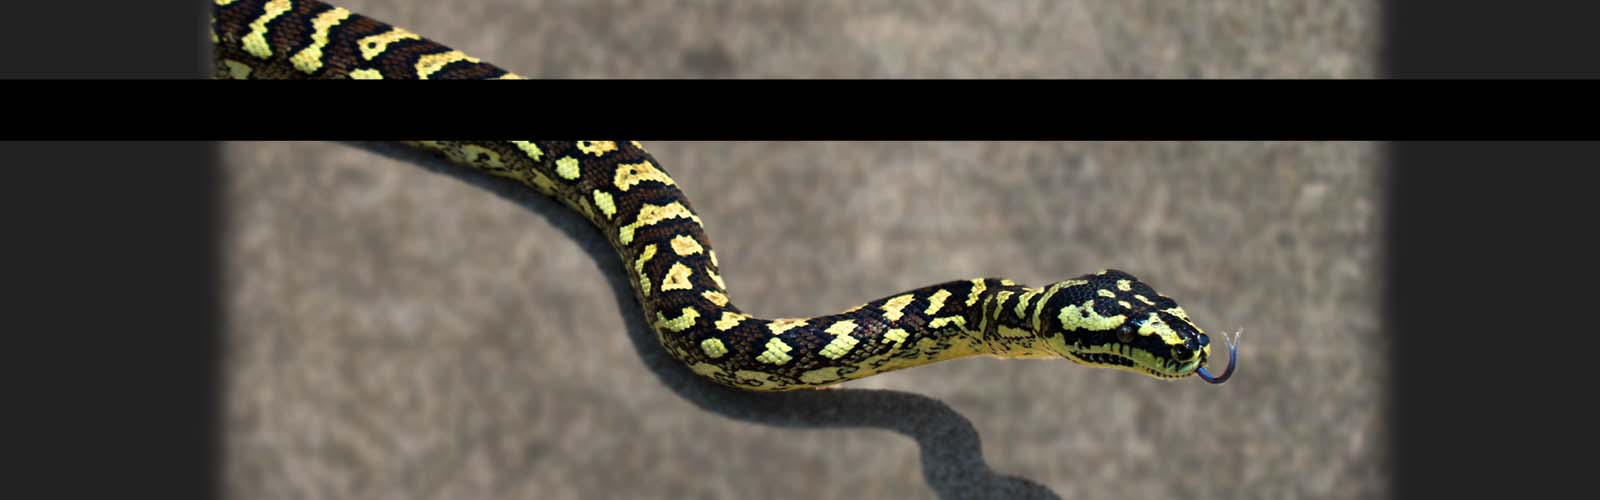 Black and Yellow Snake Slithering